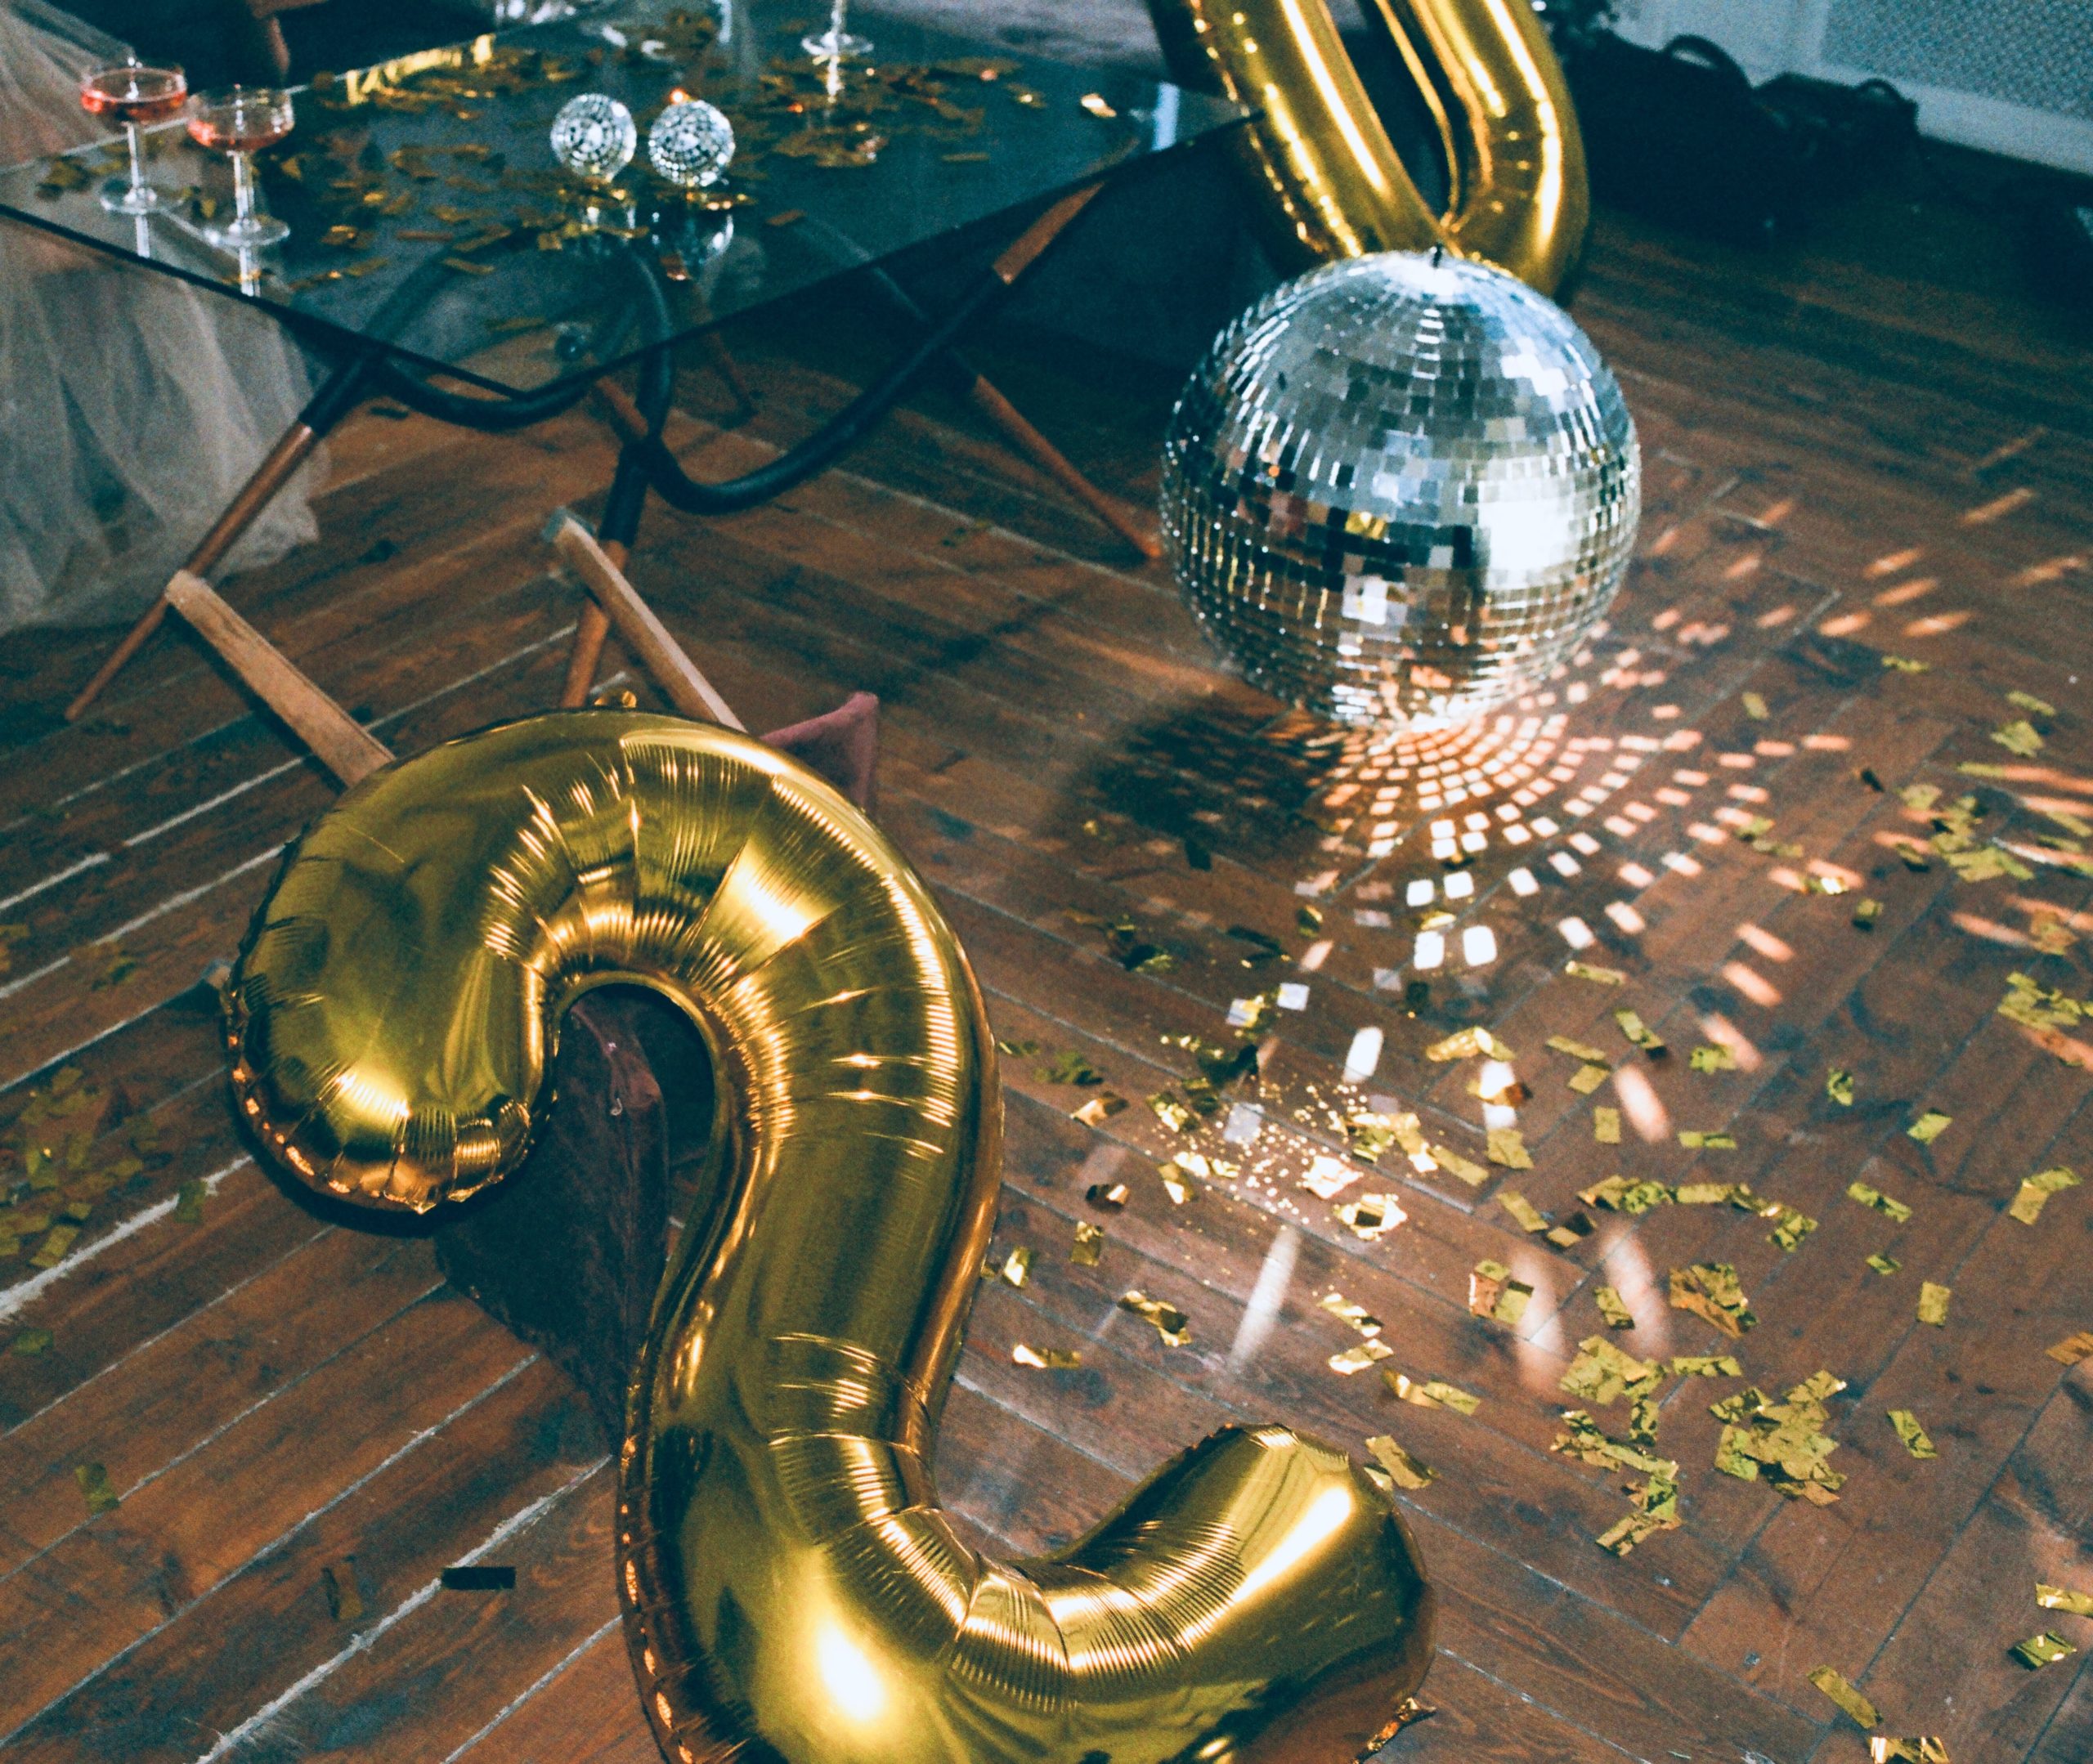 A gold balloon in the shape of the letter S lays on a wood floor near a disco ball and another gold ballon in a scene from party.